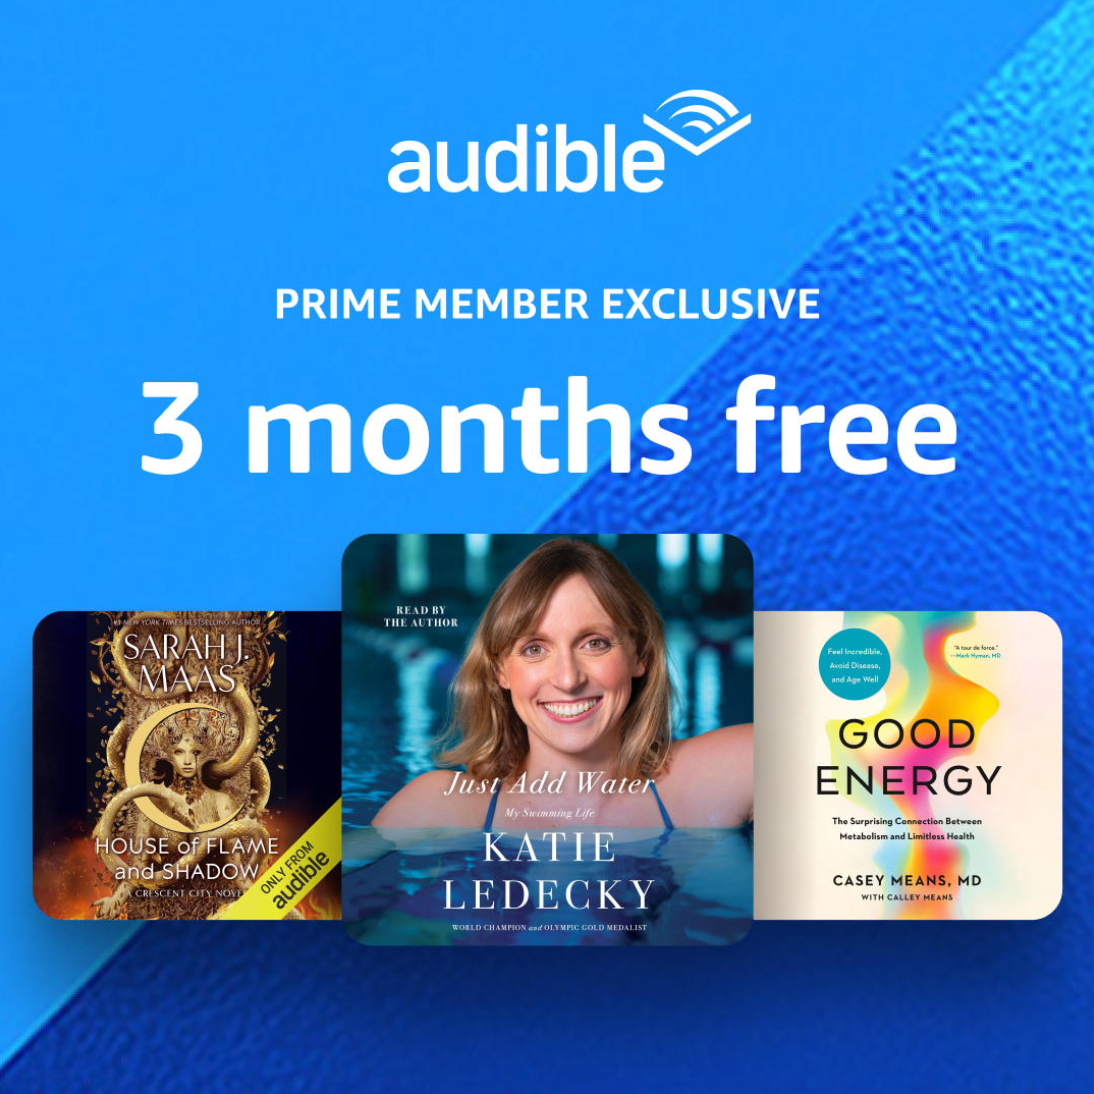 Prime member exclusive: 3 months free from Audible